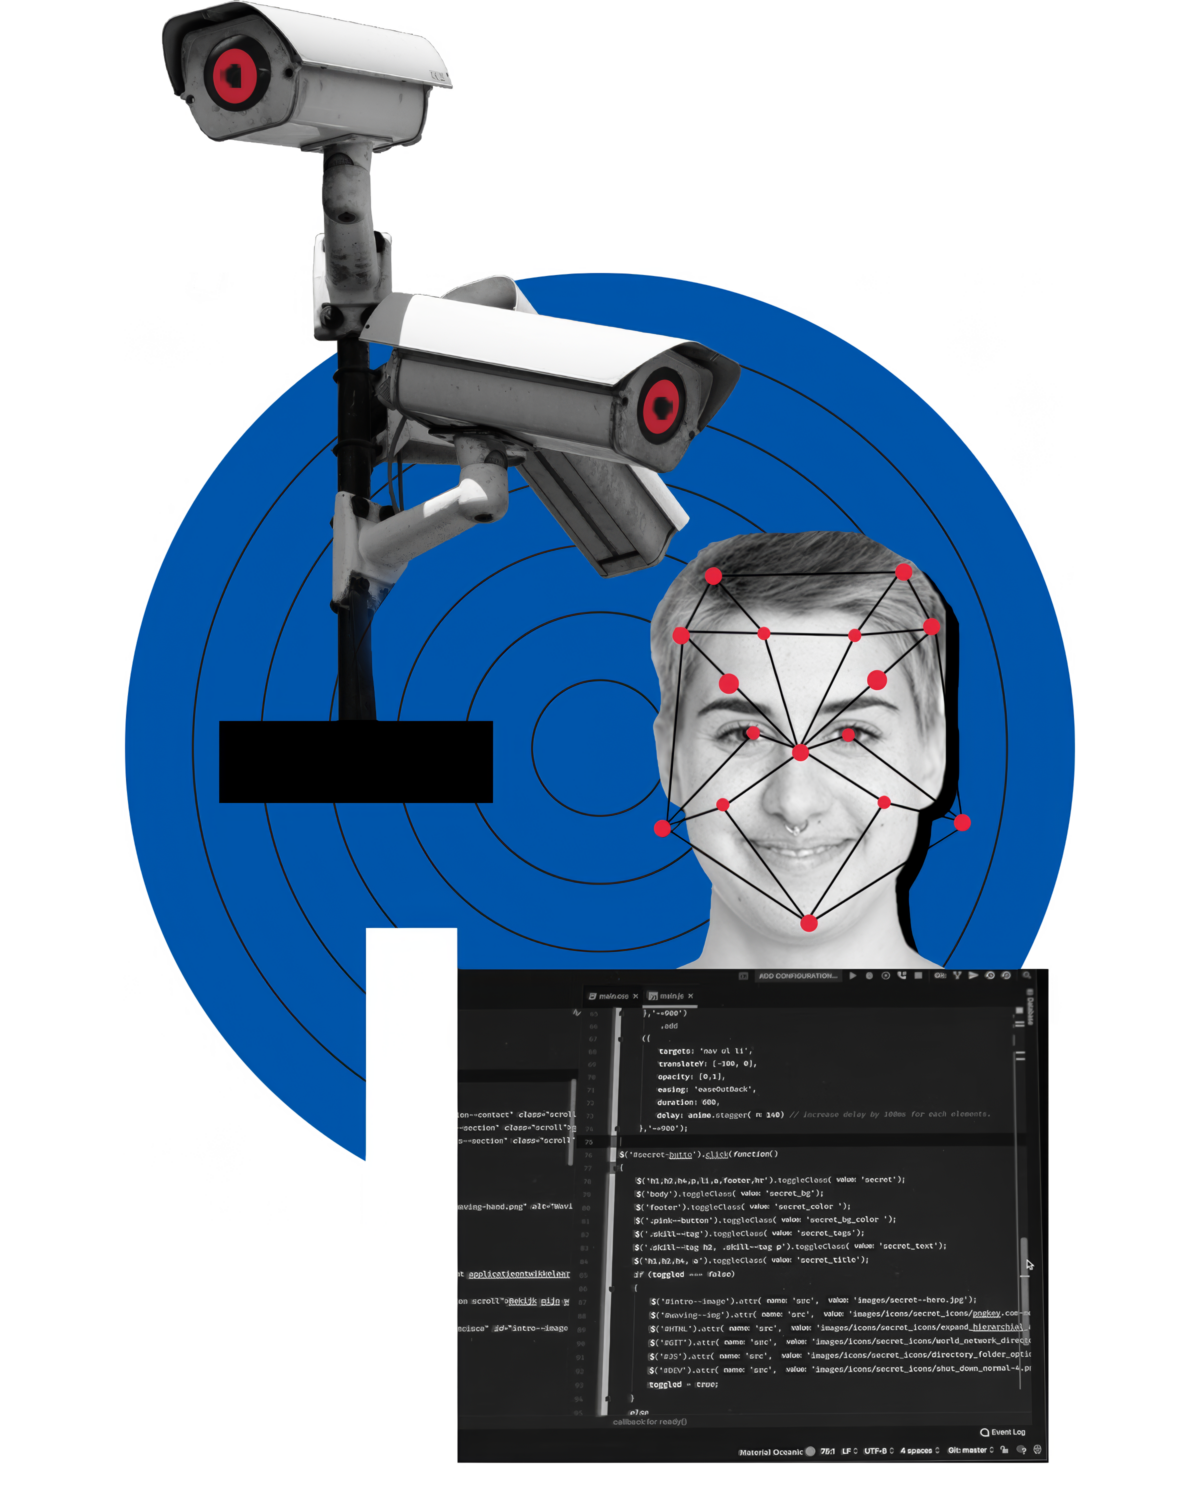 Privacy Collage. Elements include: surveillance cameras, facial recognition tech, and a computer screen of code.